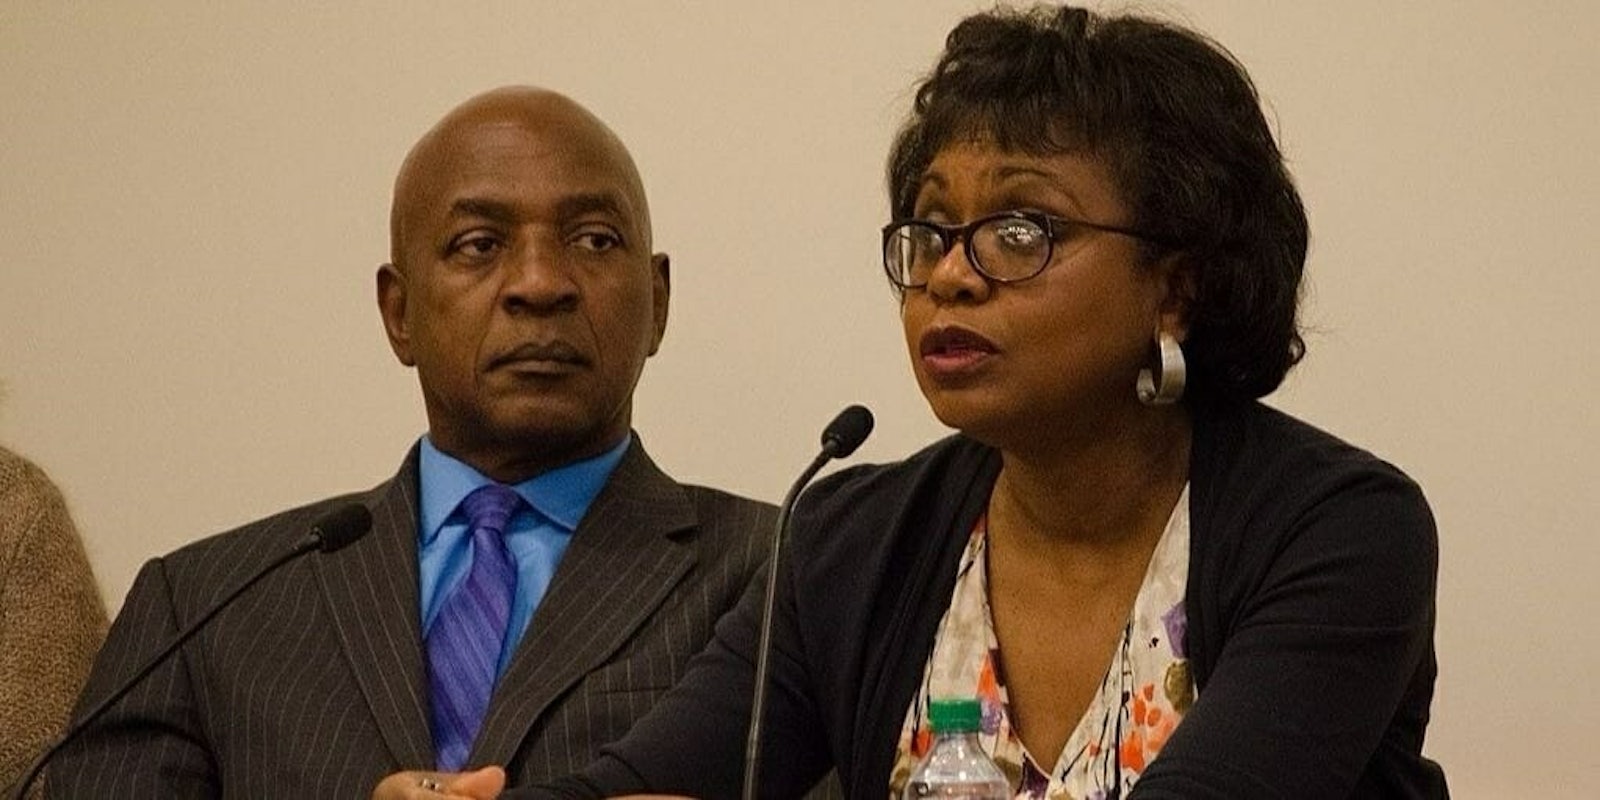 Anita Hill sexual harassment commission